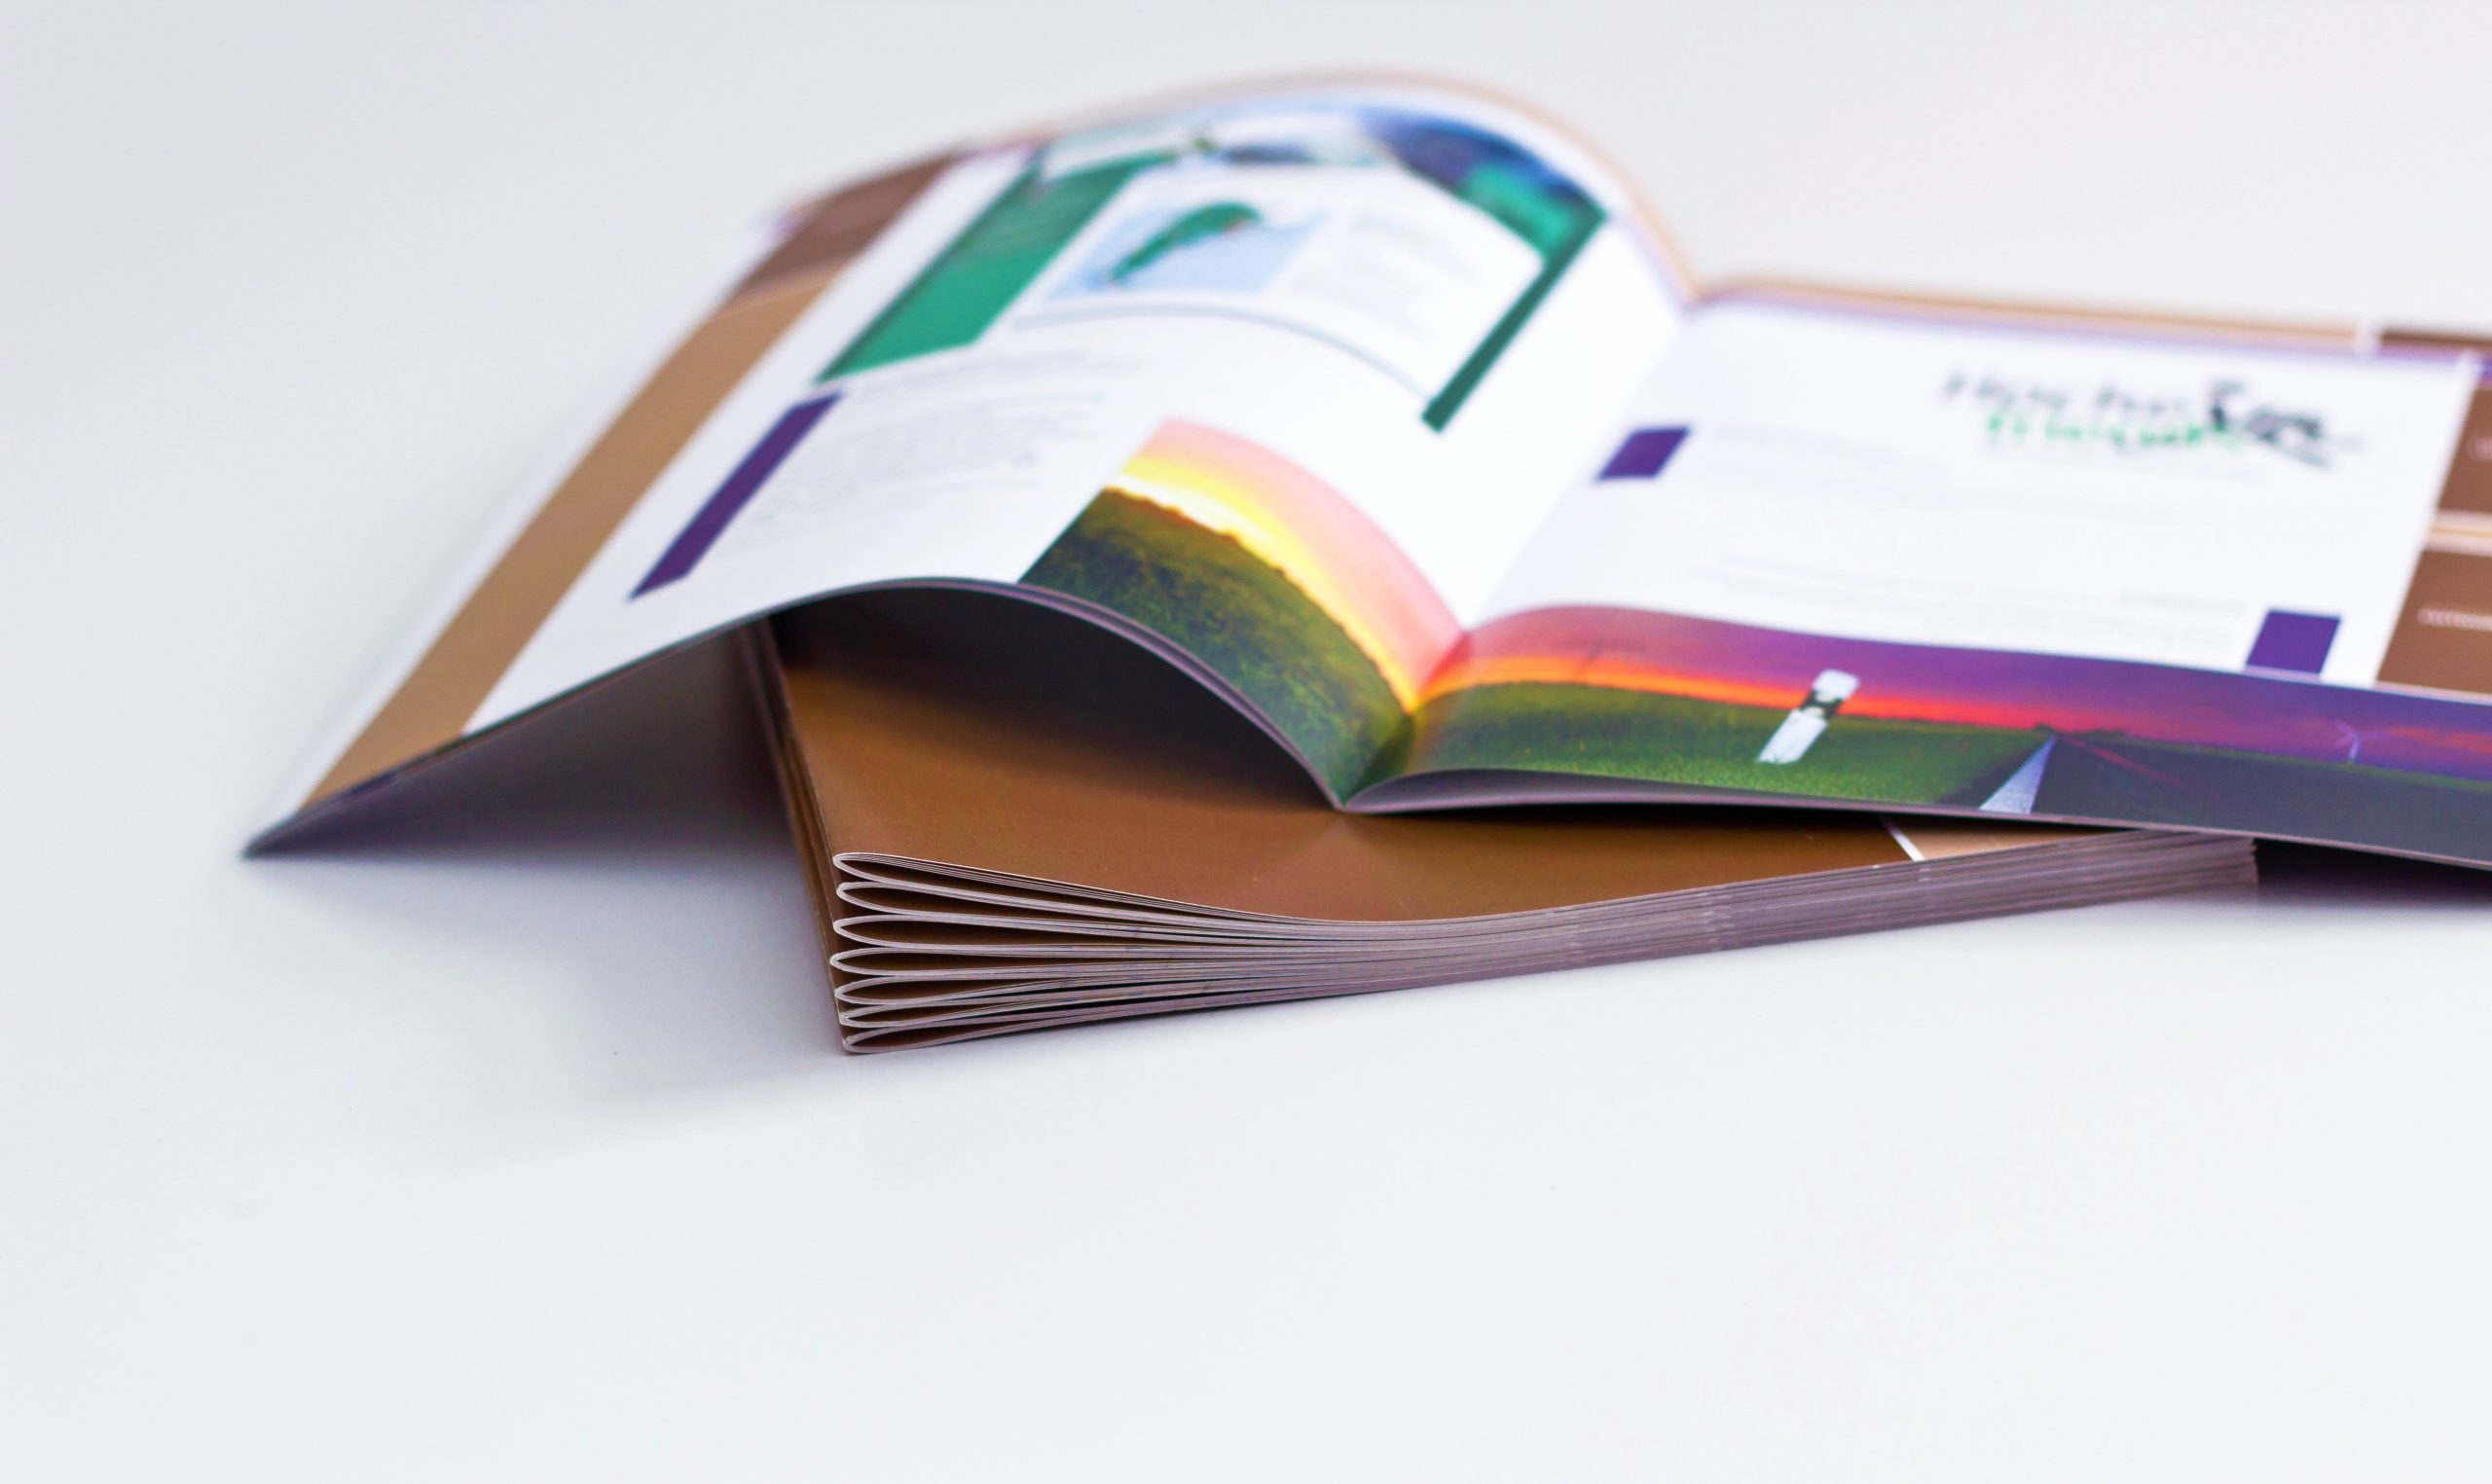 image of an open book on a white backdrop with colorful pages